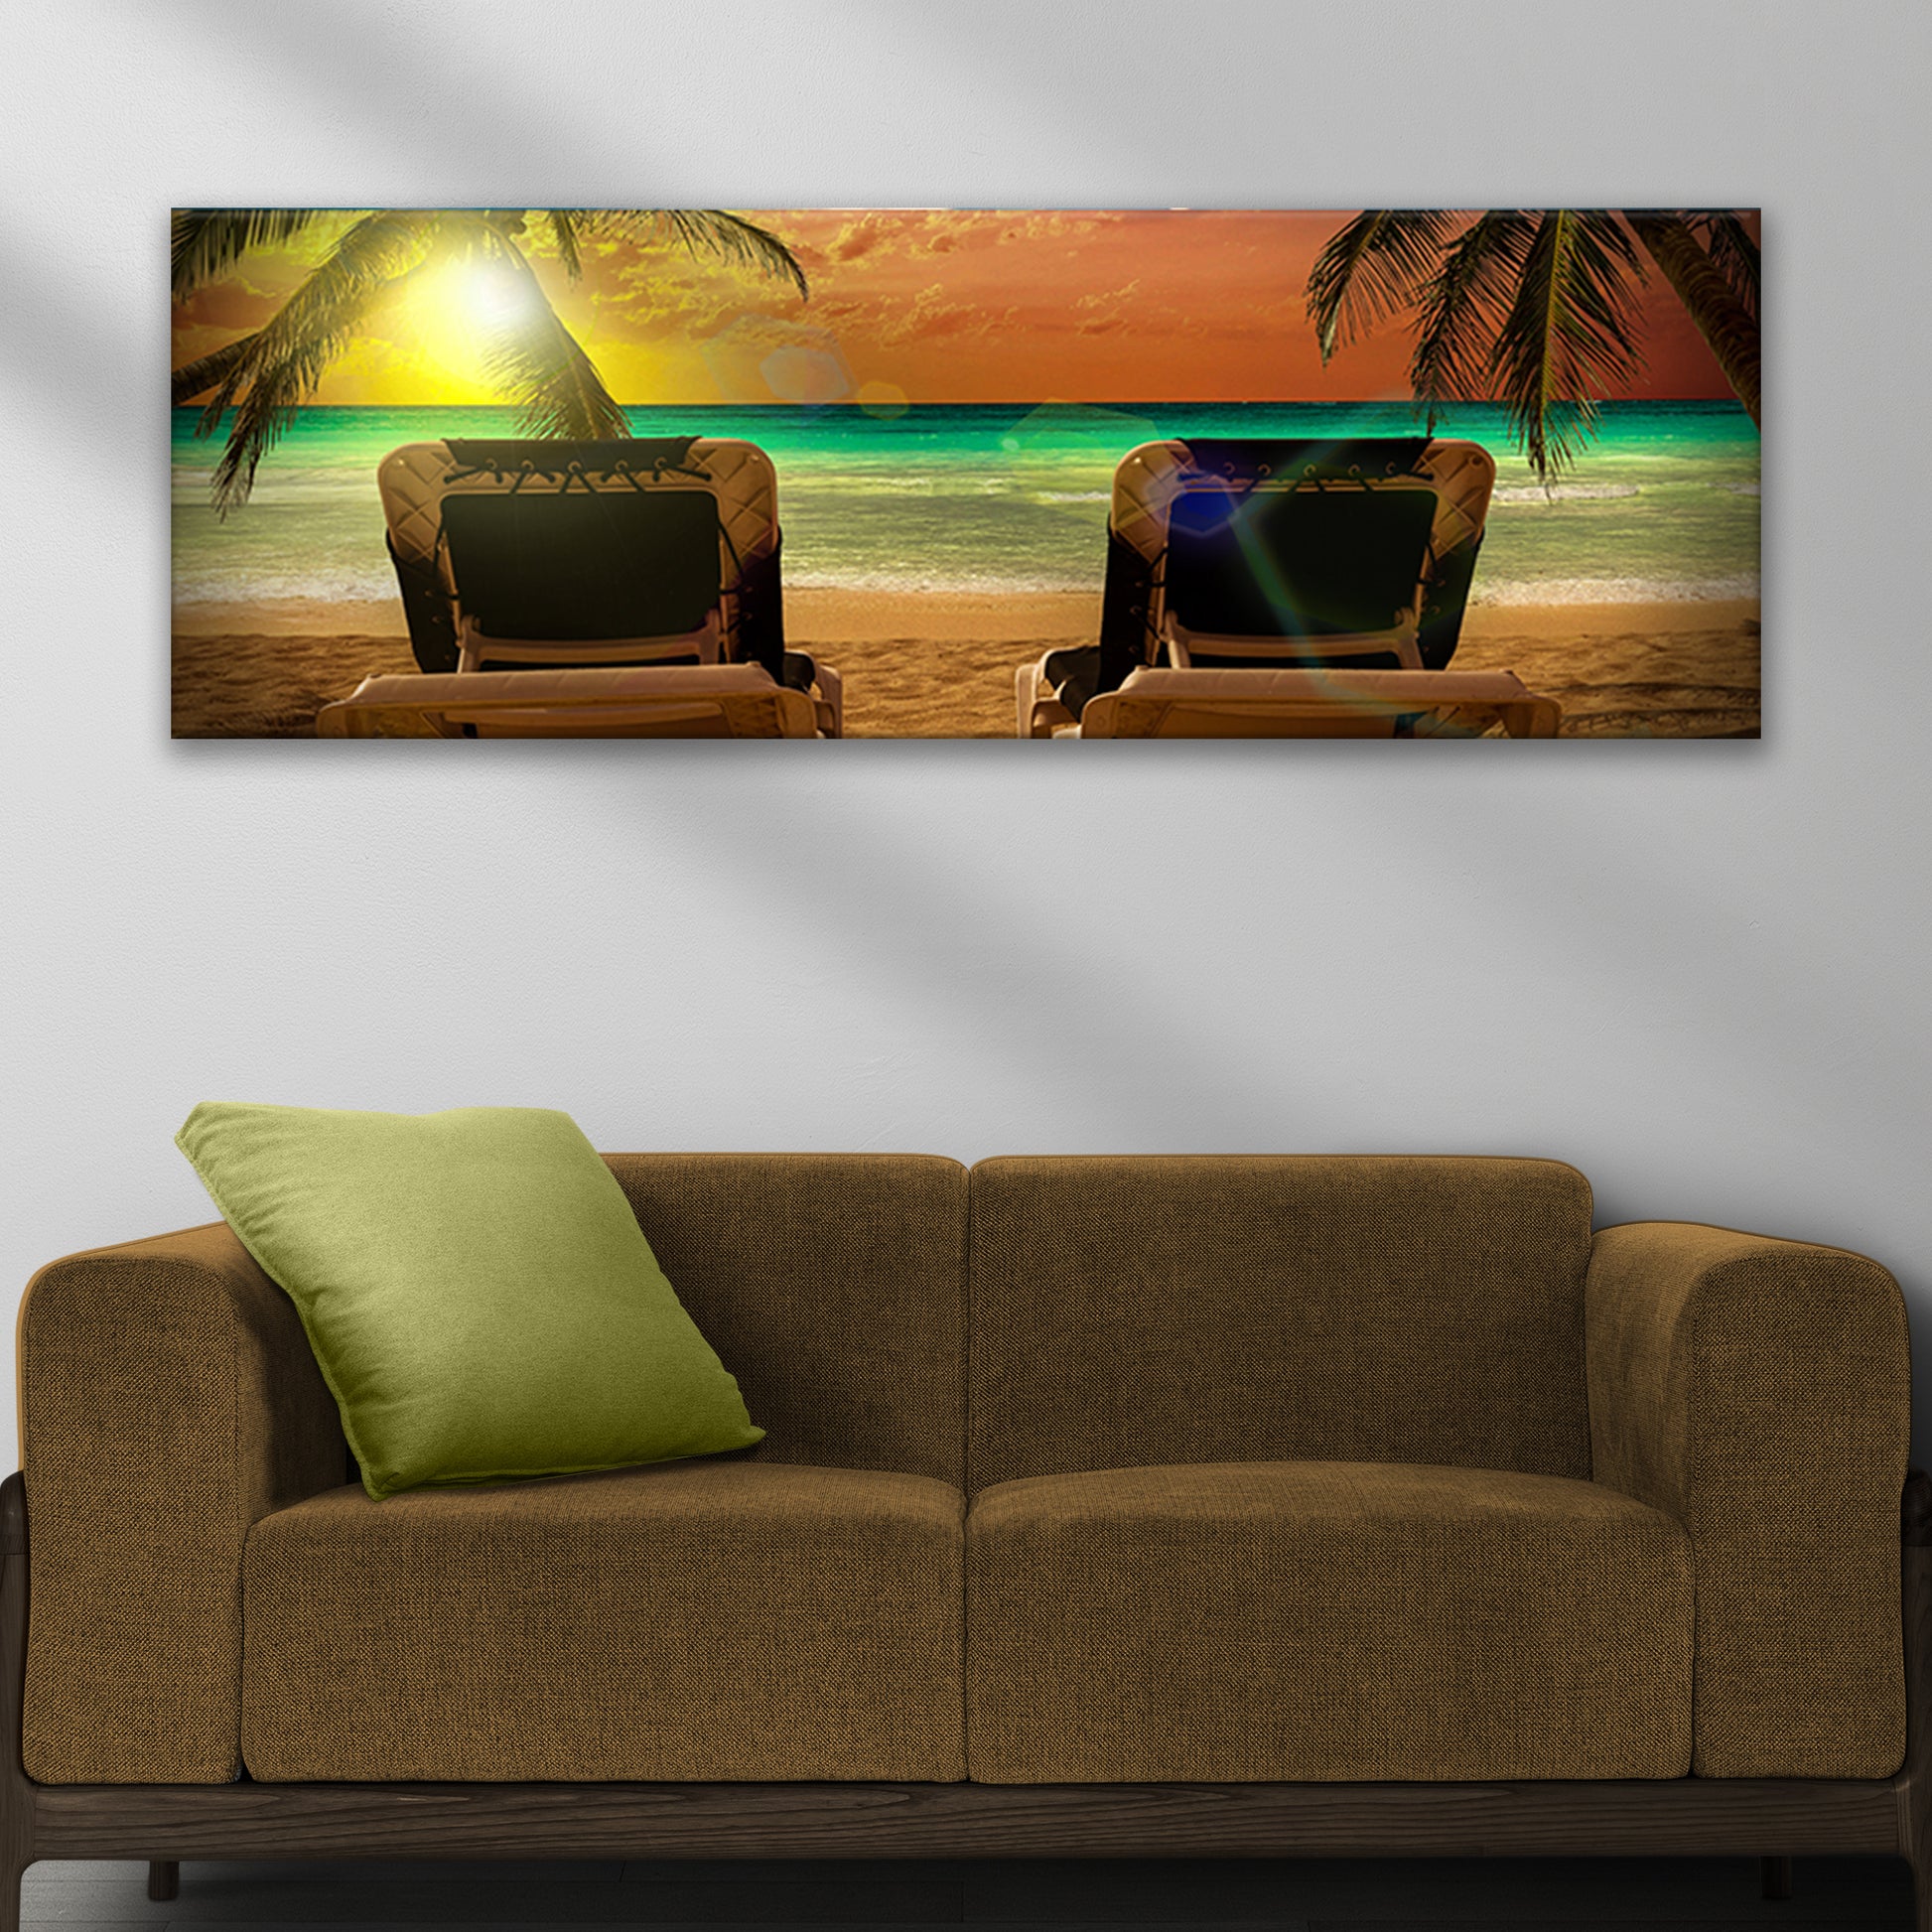 Tropical Beach Chairs By Sunset Canvas Wall Art Style 2 - Image by Tailored Canvases